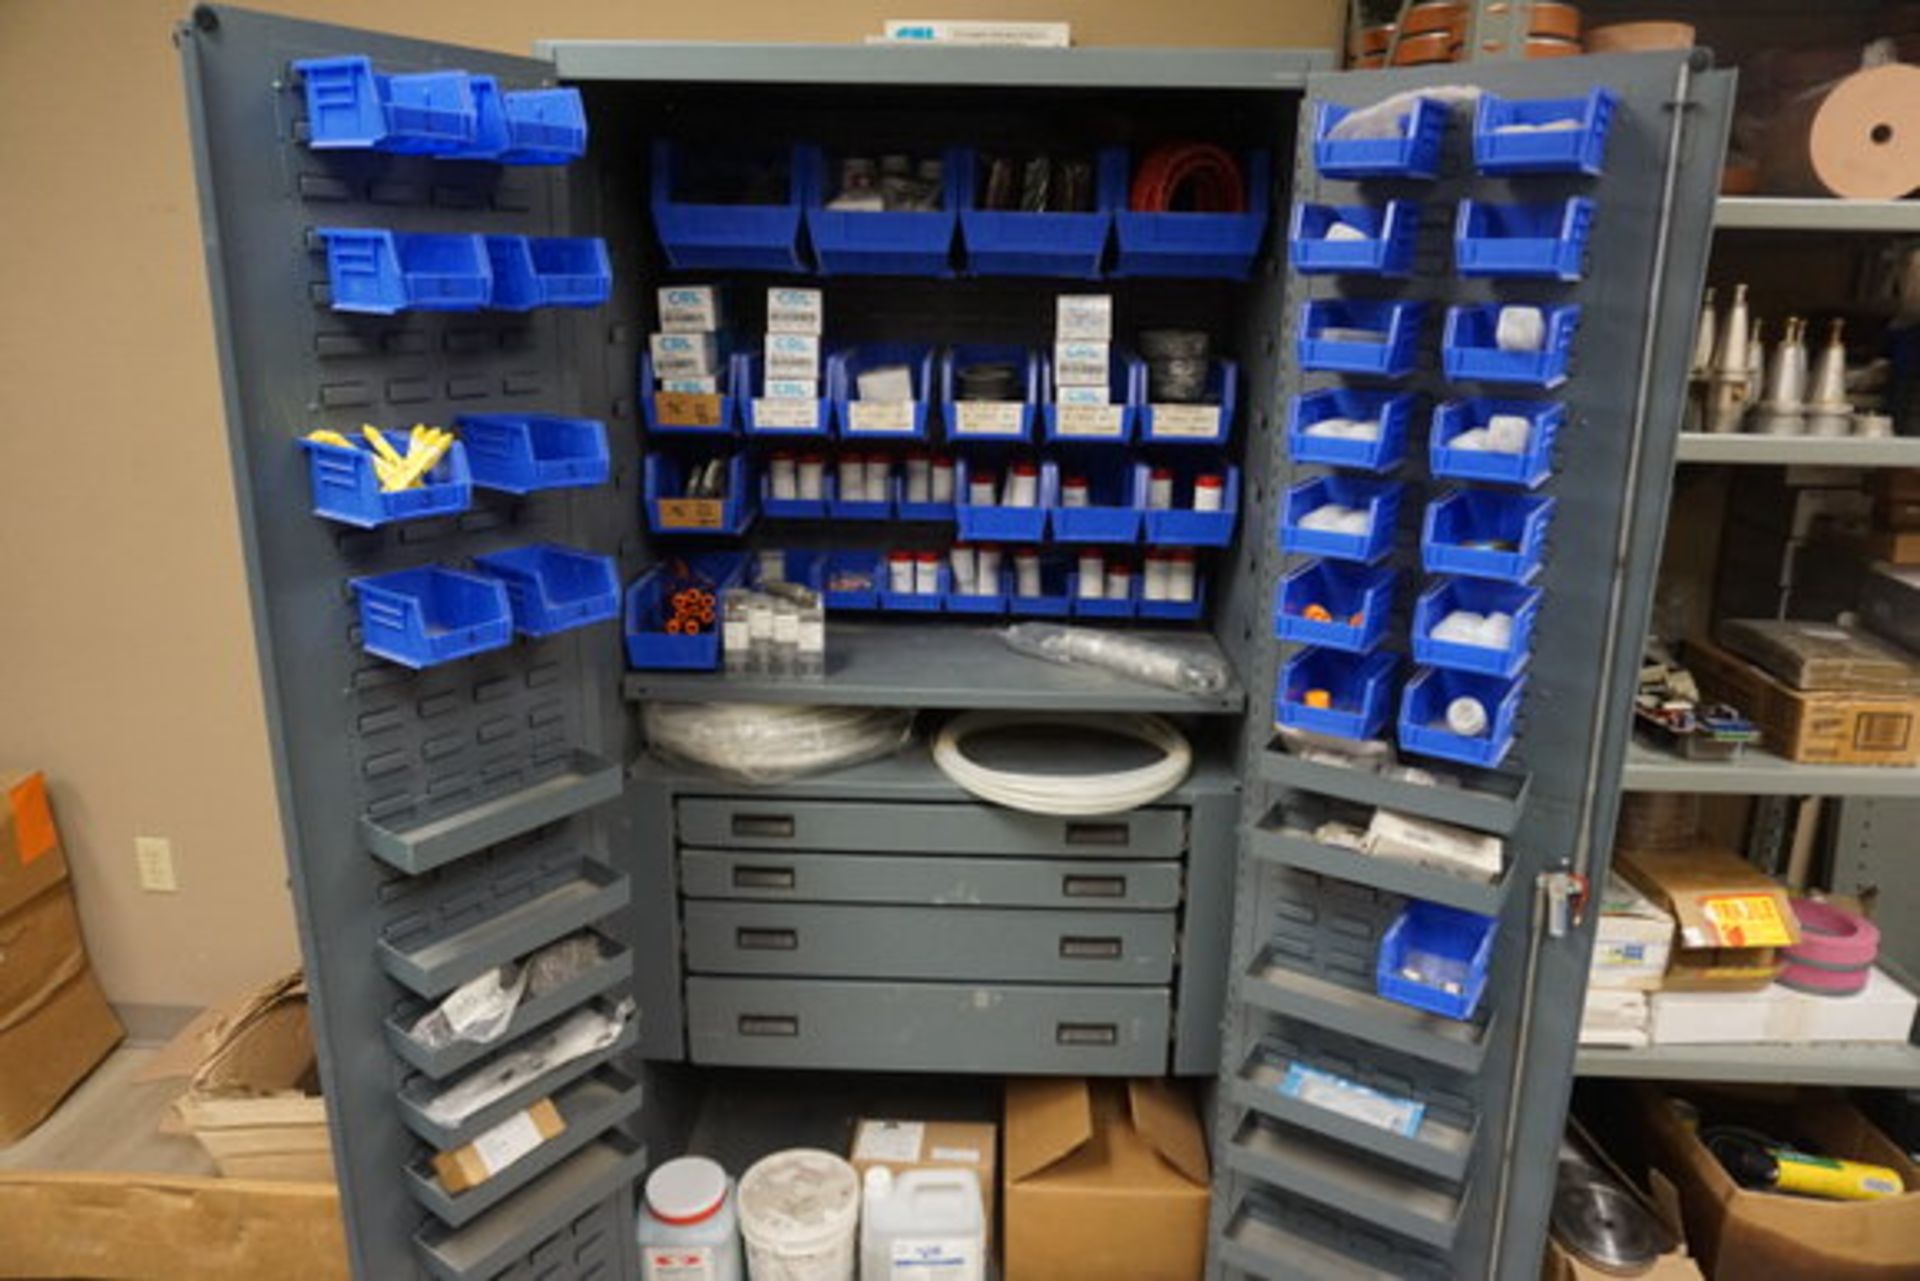 DURHAM STORAGE CABINET W/ CONT: CUTTING TOOLS, TOOL SPINDLES & HOLDERS, SANDING BELTS, TOOLS MISC - Image 17 of 17